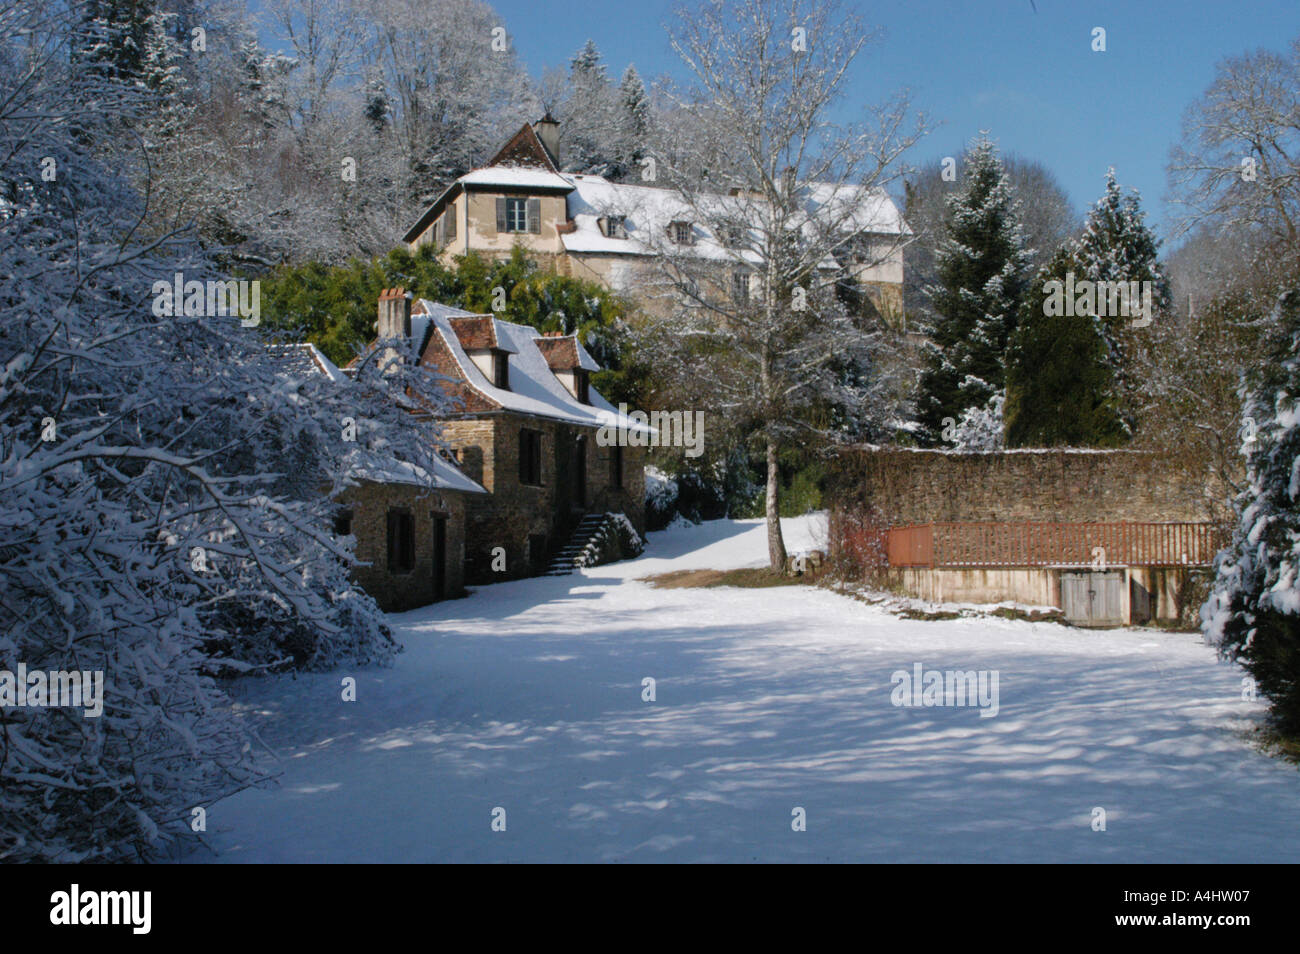 holiday gites winter scene with snow and trees in france Stock Photo